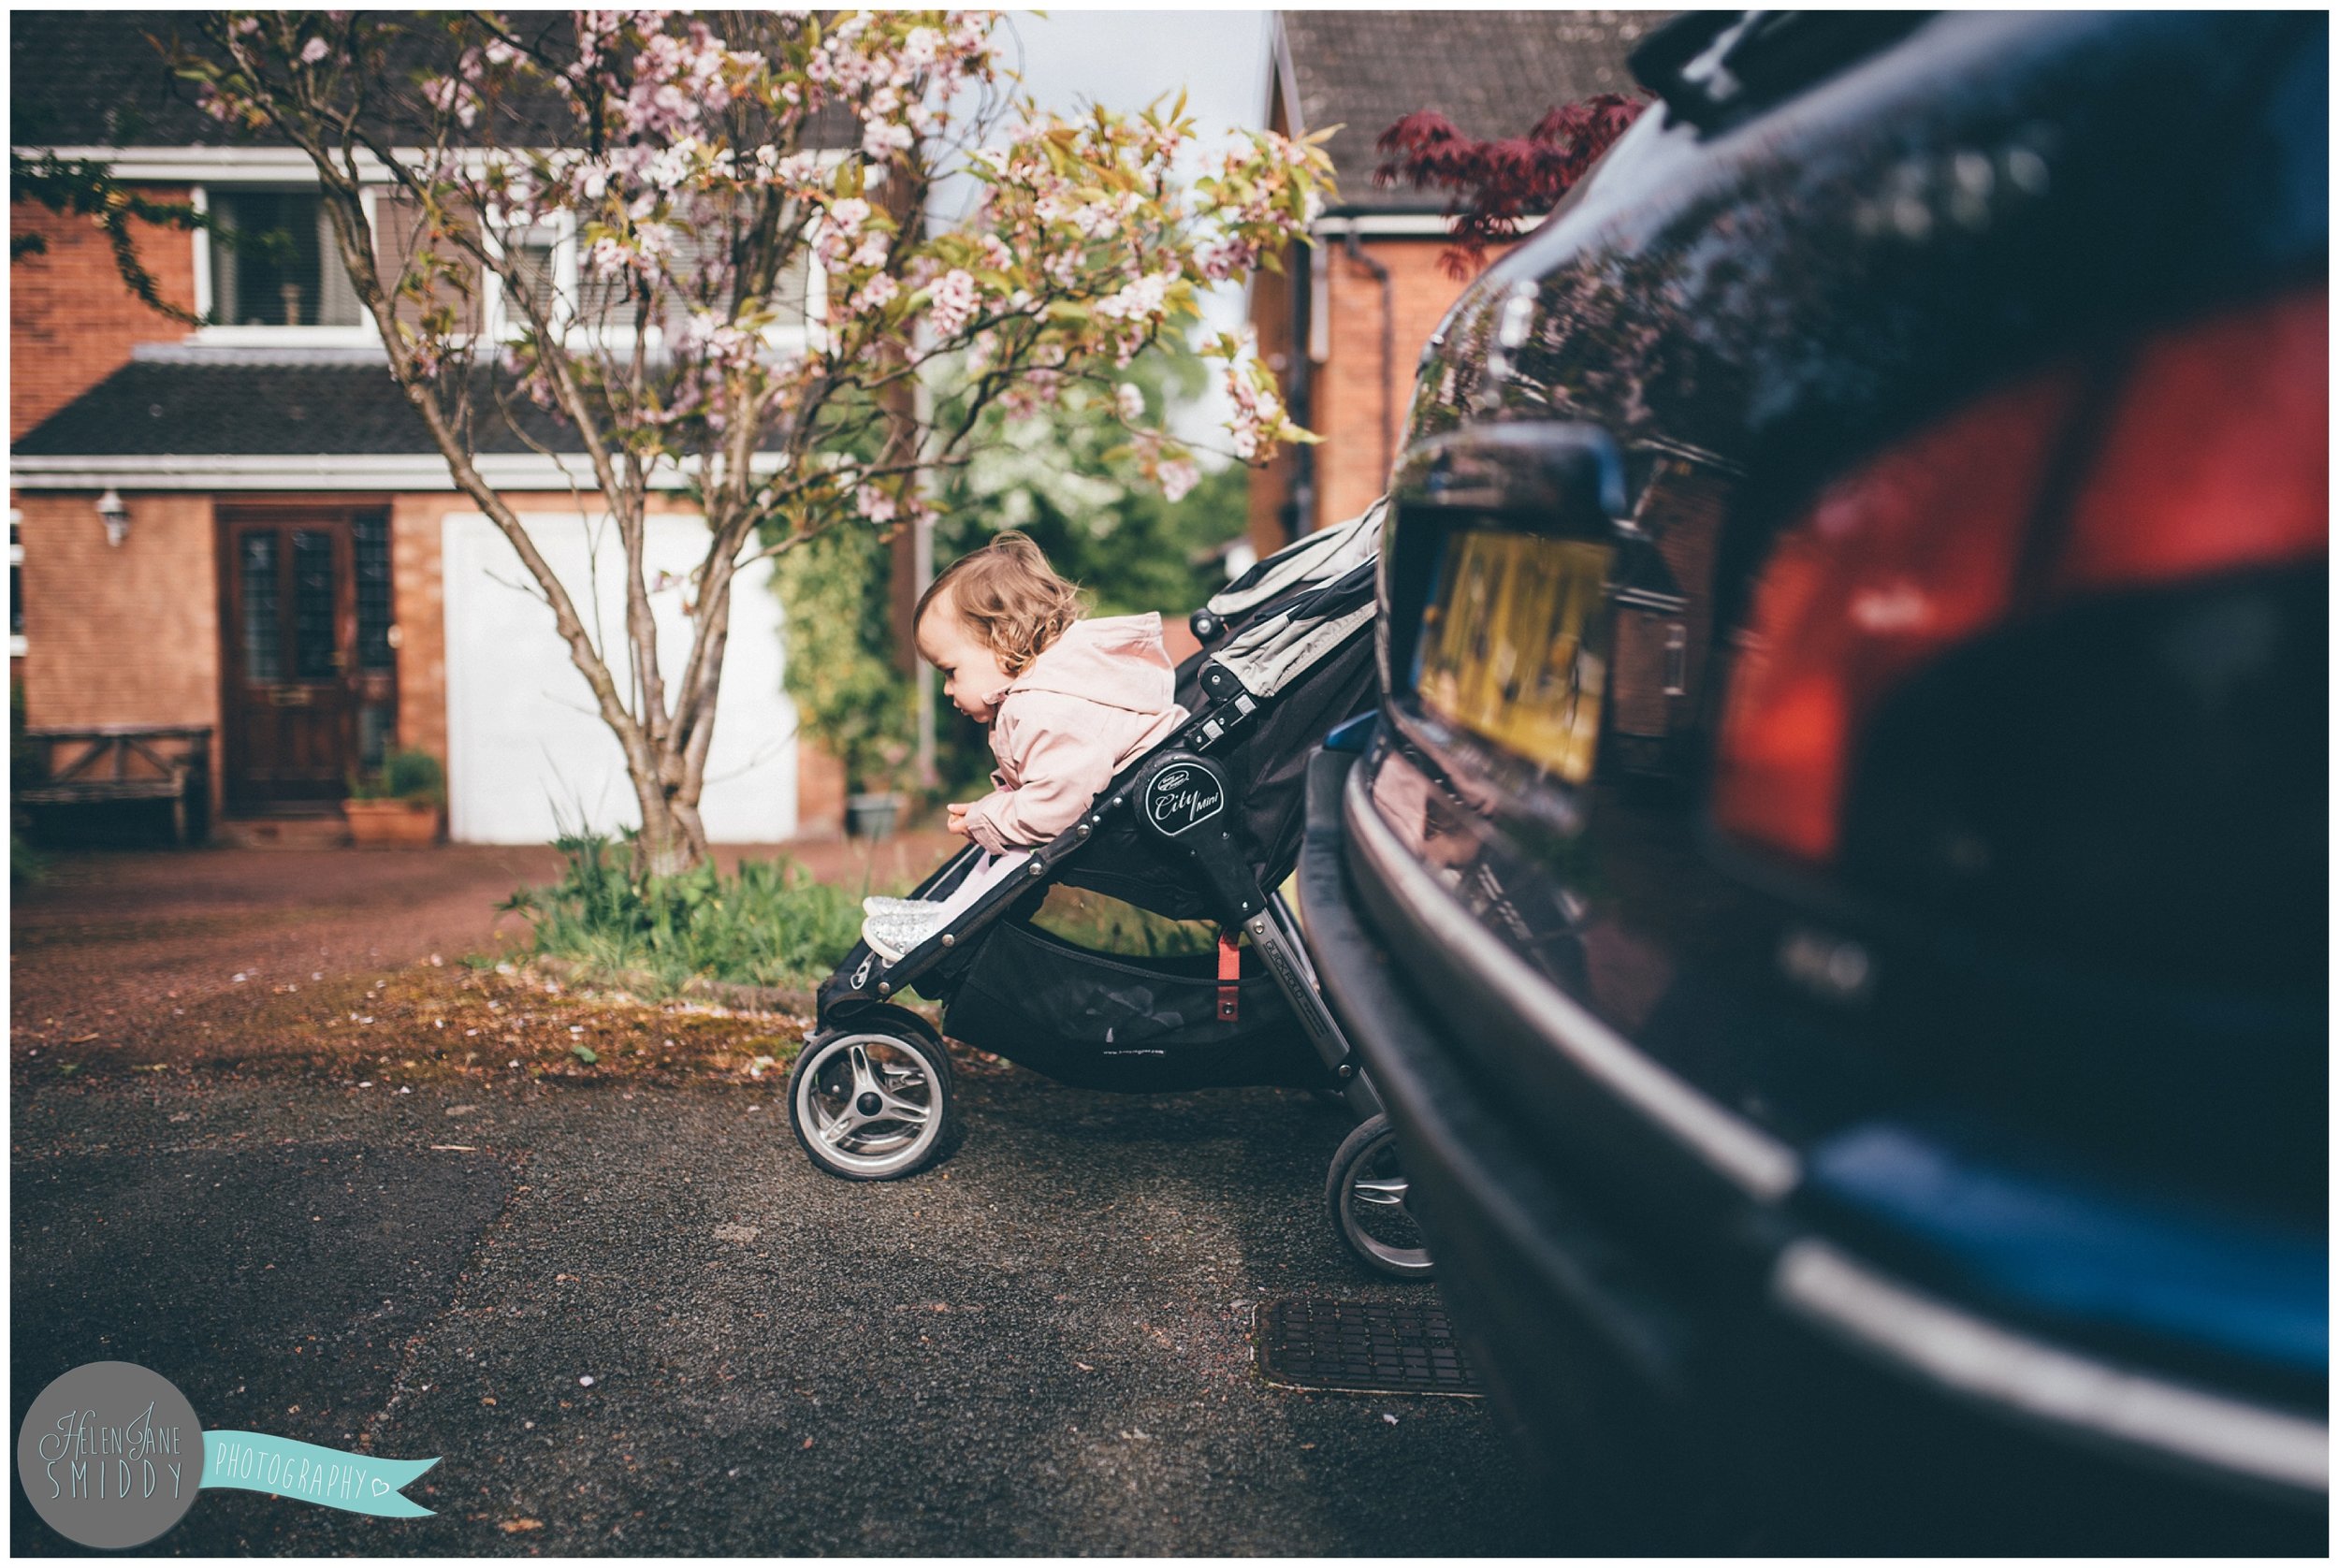 Little Zoe in her buggy during A Day In The Life photoshoot in Frodsham, Cheshire.